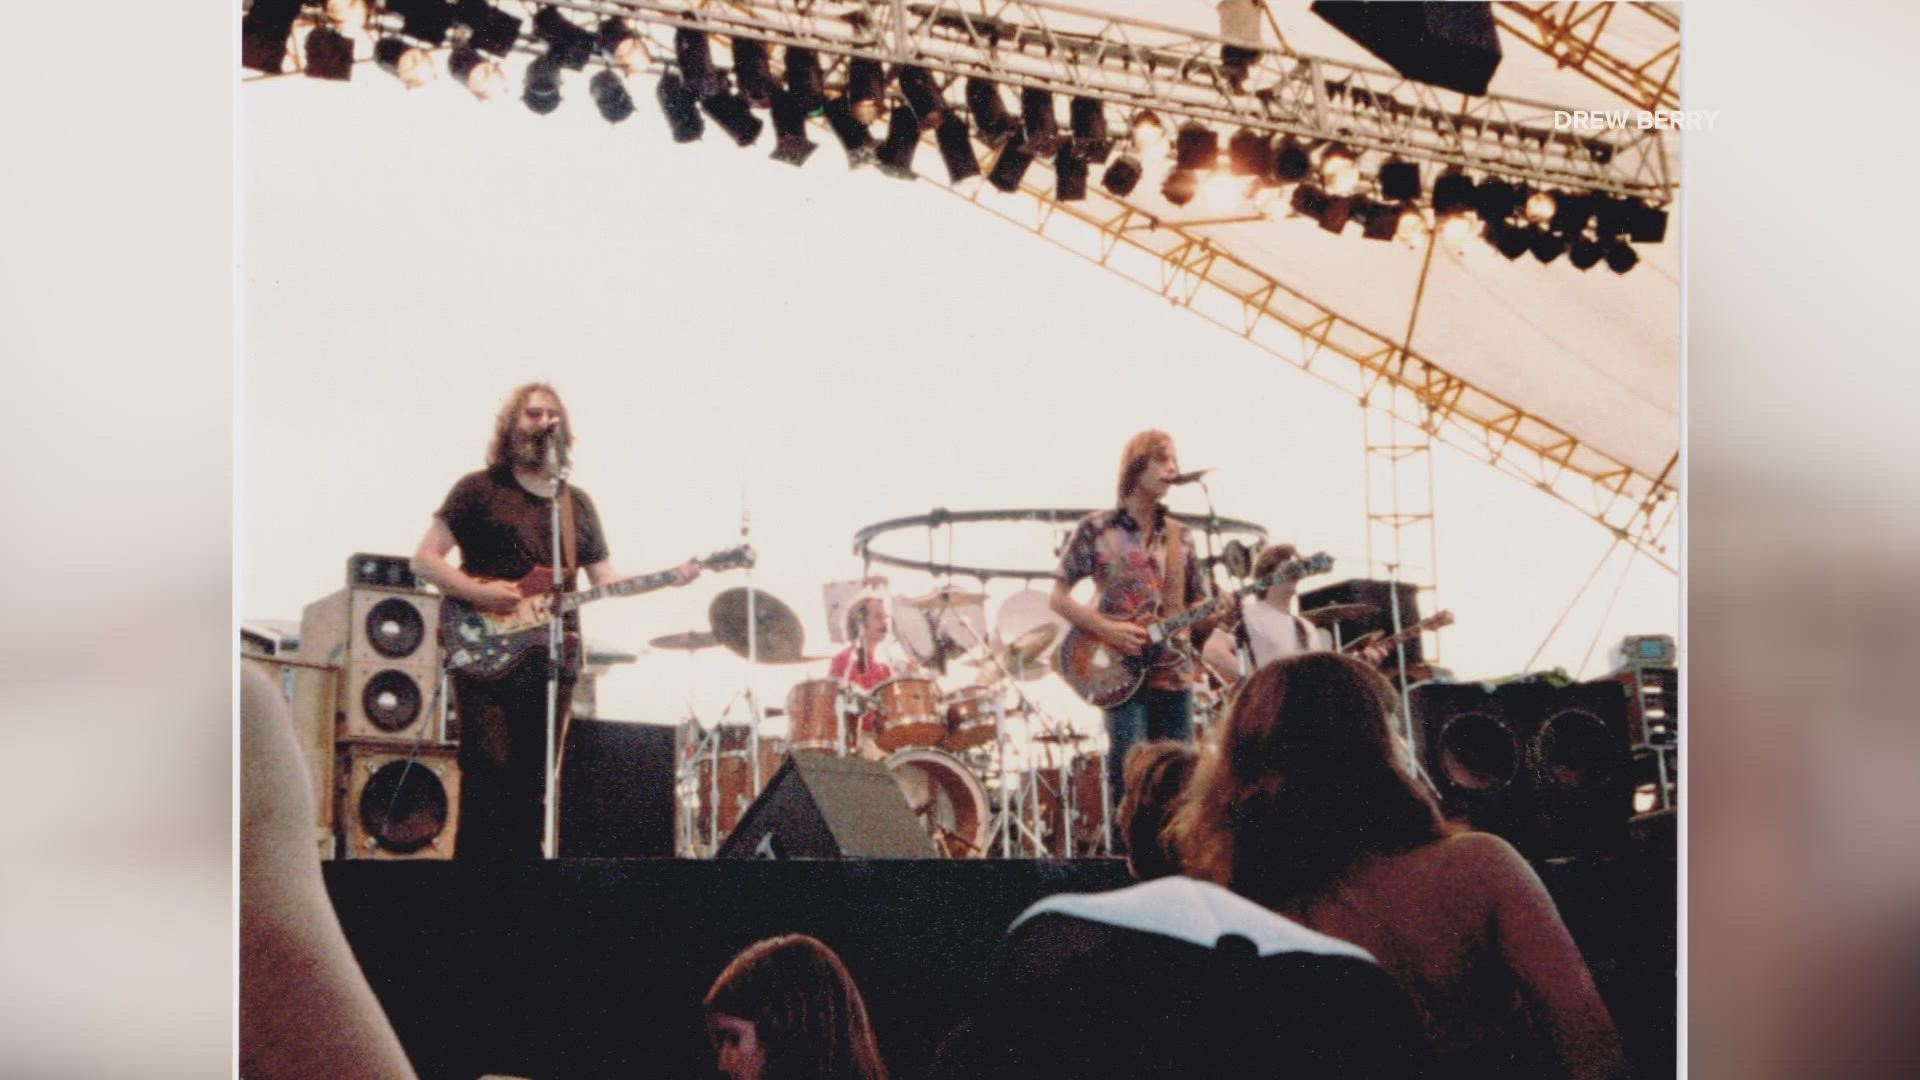 Forty-two years ago today, The Grateful Dead and their caravan descended on the now-nonexistent Maine State Fairgrounds in Lewiston.